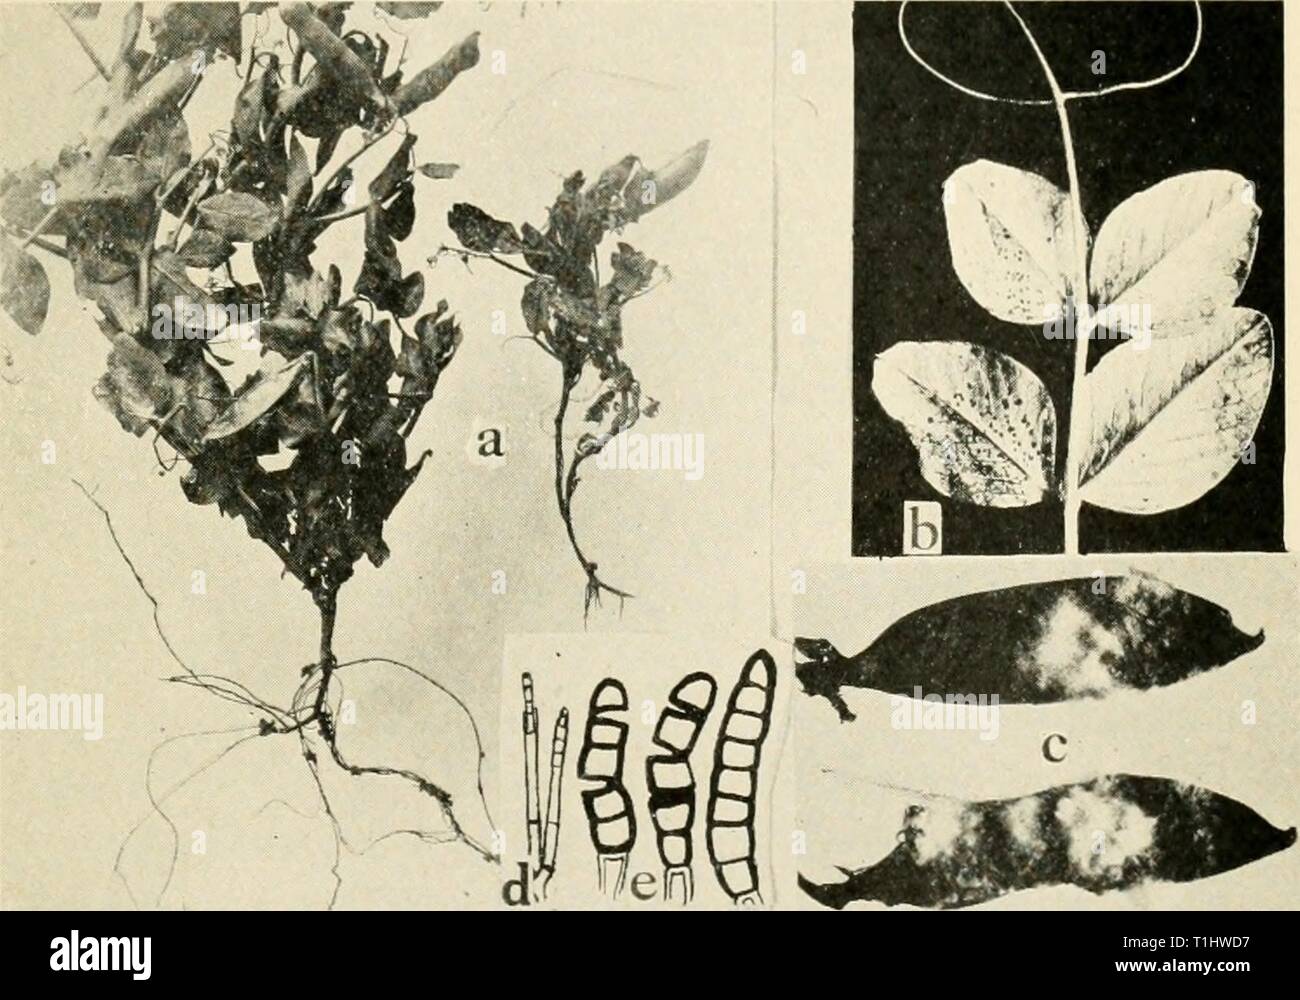 Diseases of truck crops and Diseases of truck crops and their control  diseasesoftruckc00taub Year: 1918  Fig. 51. Diseases of the Garden Pea and Bean. a. Thielavia root rot, to the right diseased plant with no root system, to the left healthy, b. stomatal leaf infection by Pseudomonas pisi, c. Sclerotinia liberliana rot on bean pods, d. endospore of Thielavia basicola, e. chlamydospores of T. basicola. Stock Photo